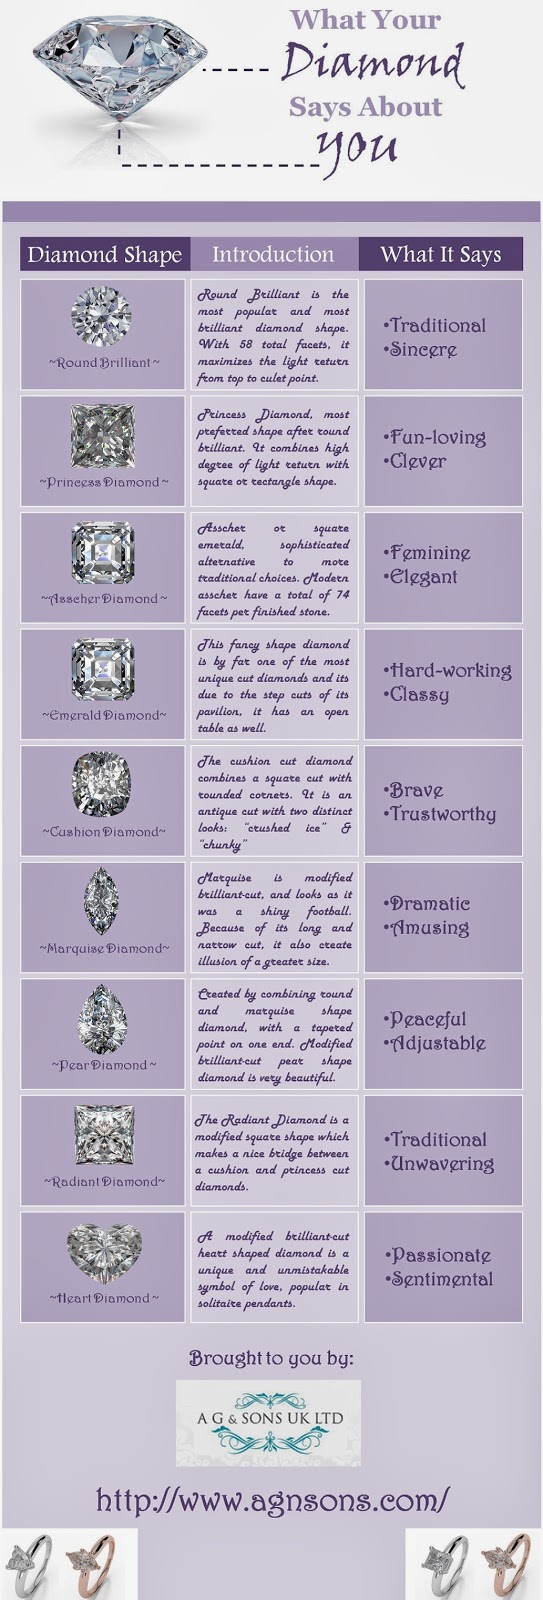 what your diamond says about you